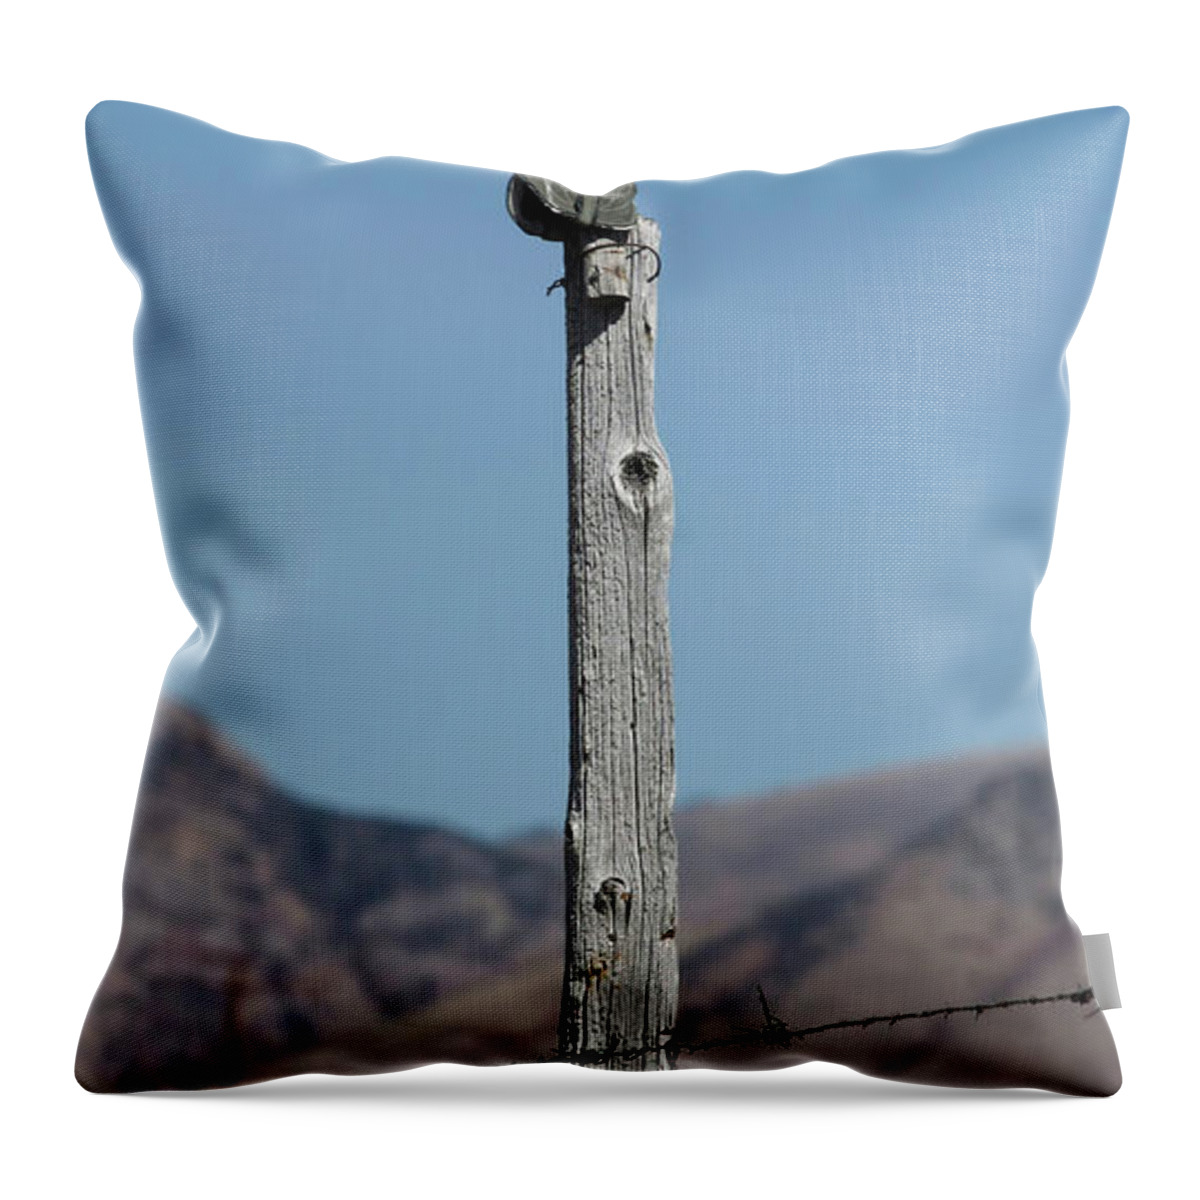 Boot Throw Pillow featuring the photograph High Steppin by Grant Groberg